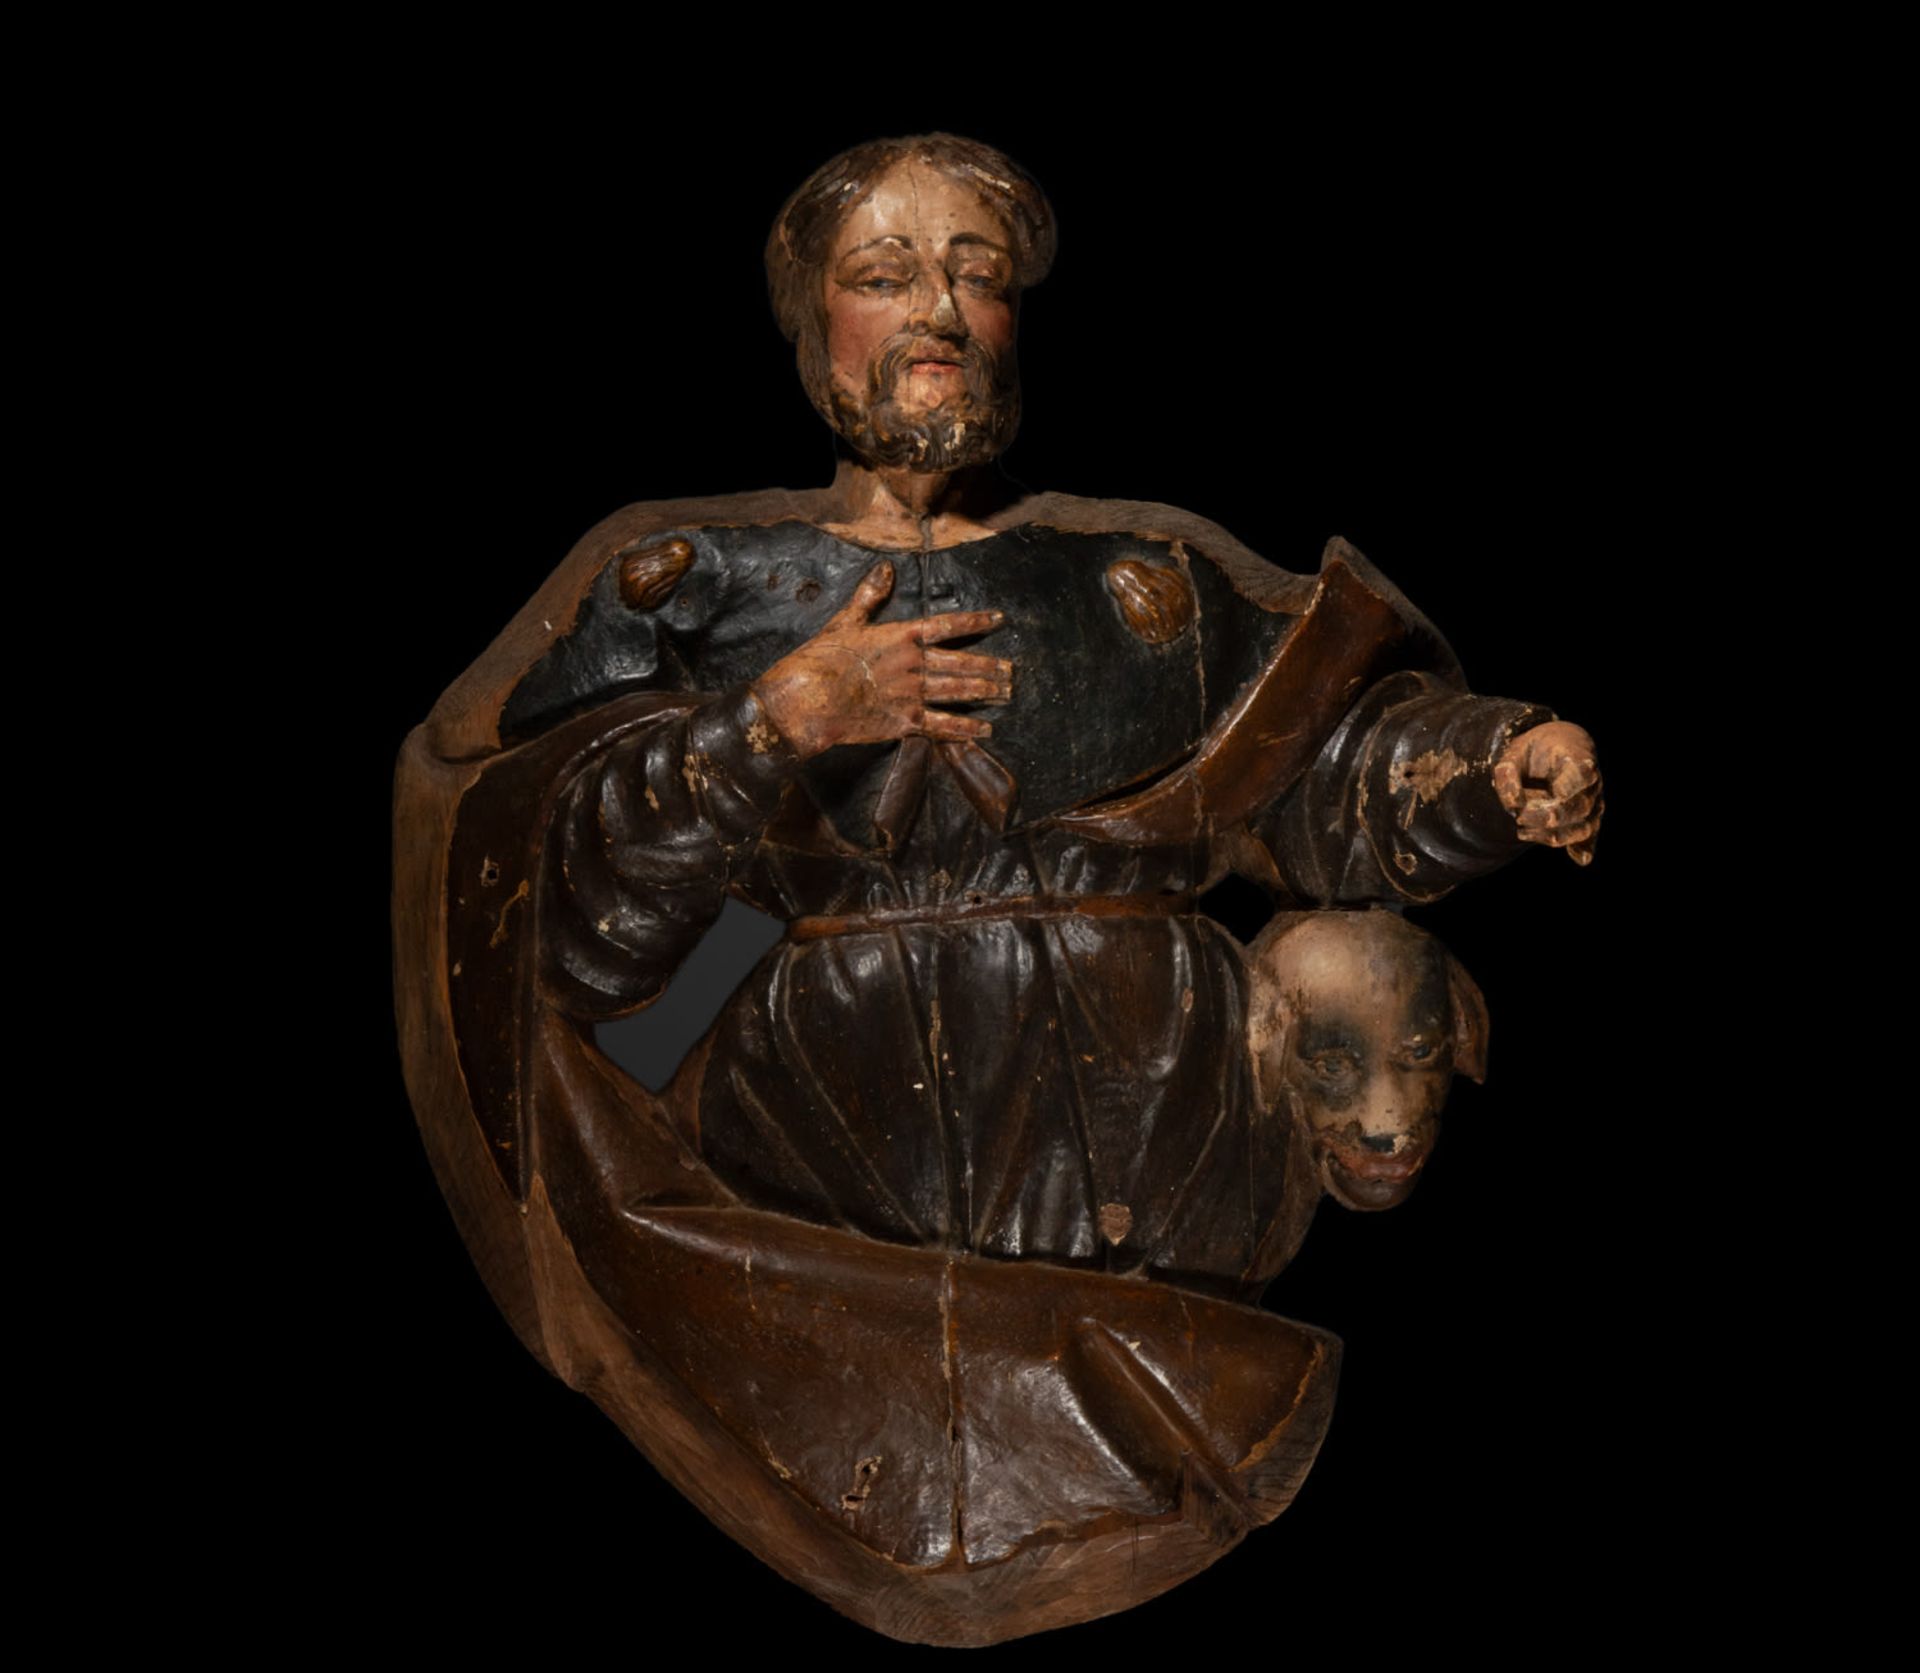 Relief of Saint James the Great in wood carving, 16th century Castilian school